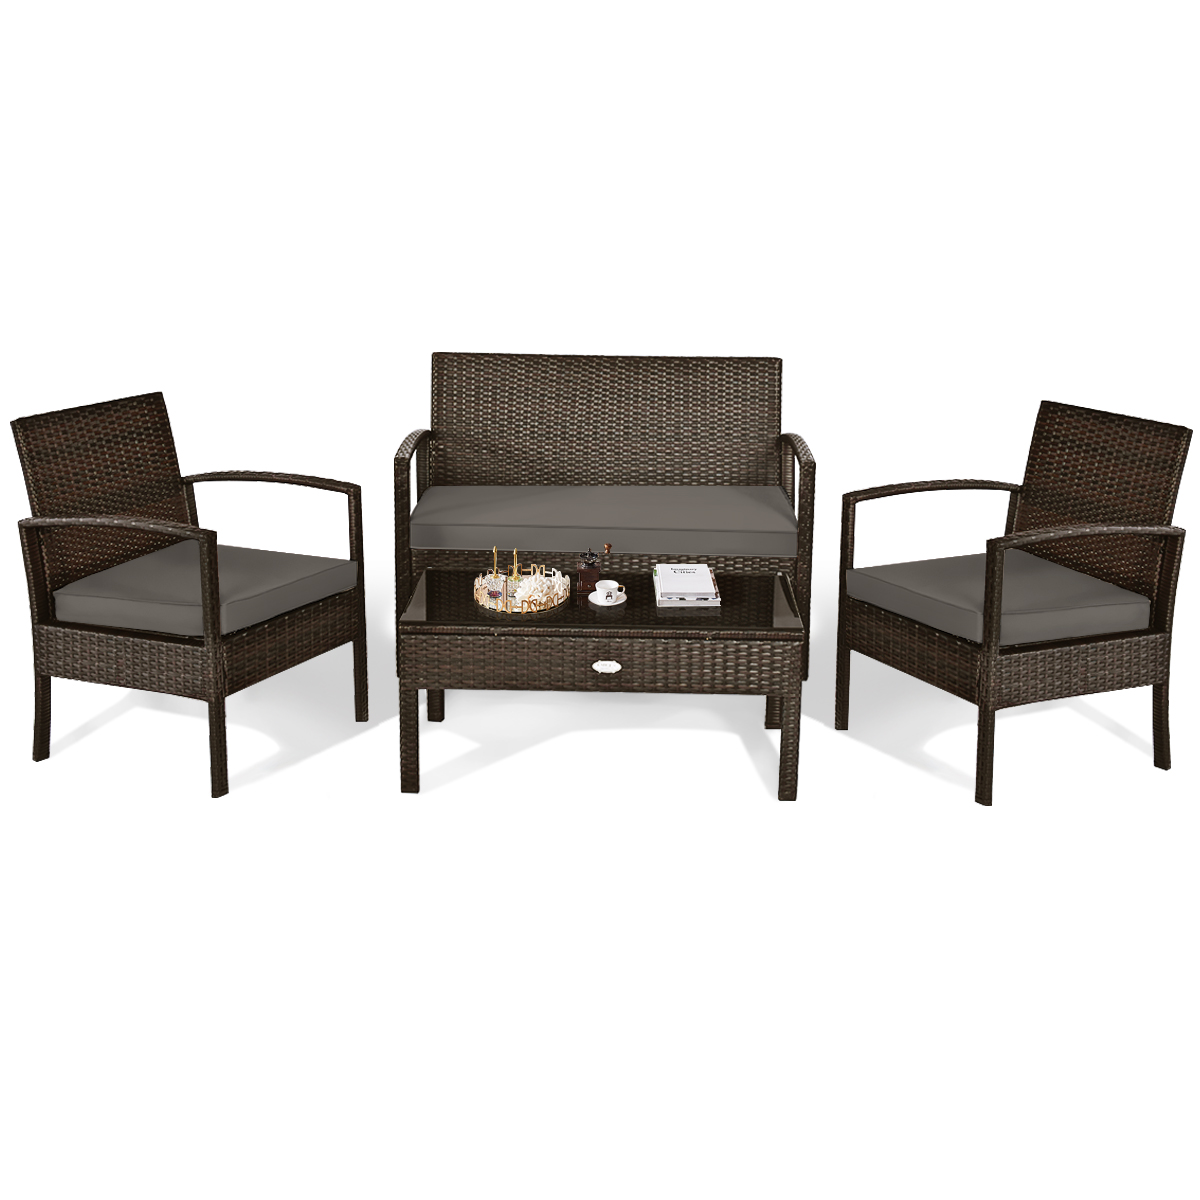 Patiojoy 4 Pieces Outdoor Patio Rattan Furniture Wicker Conversation Set Cushioned - image 5 of 5